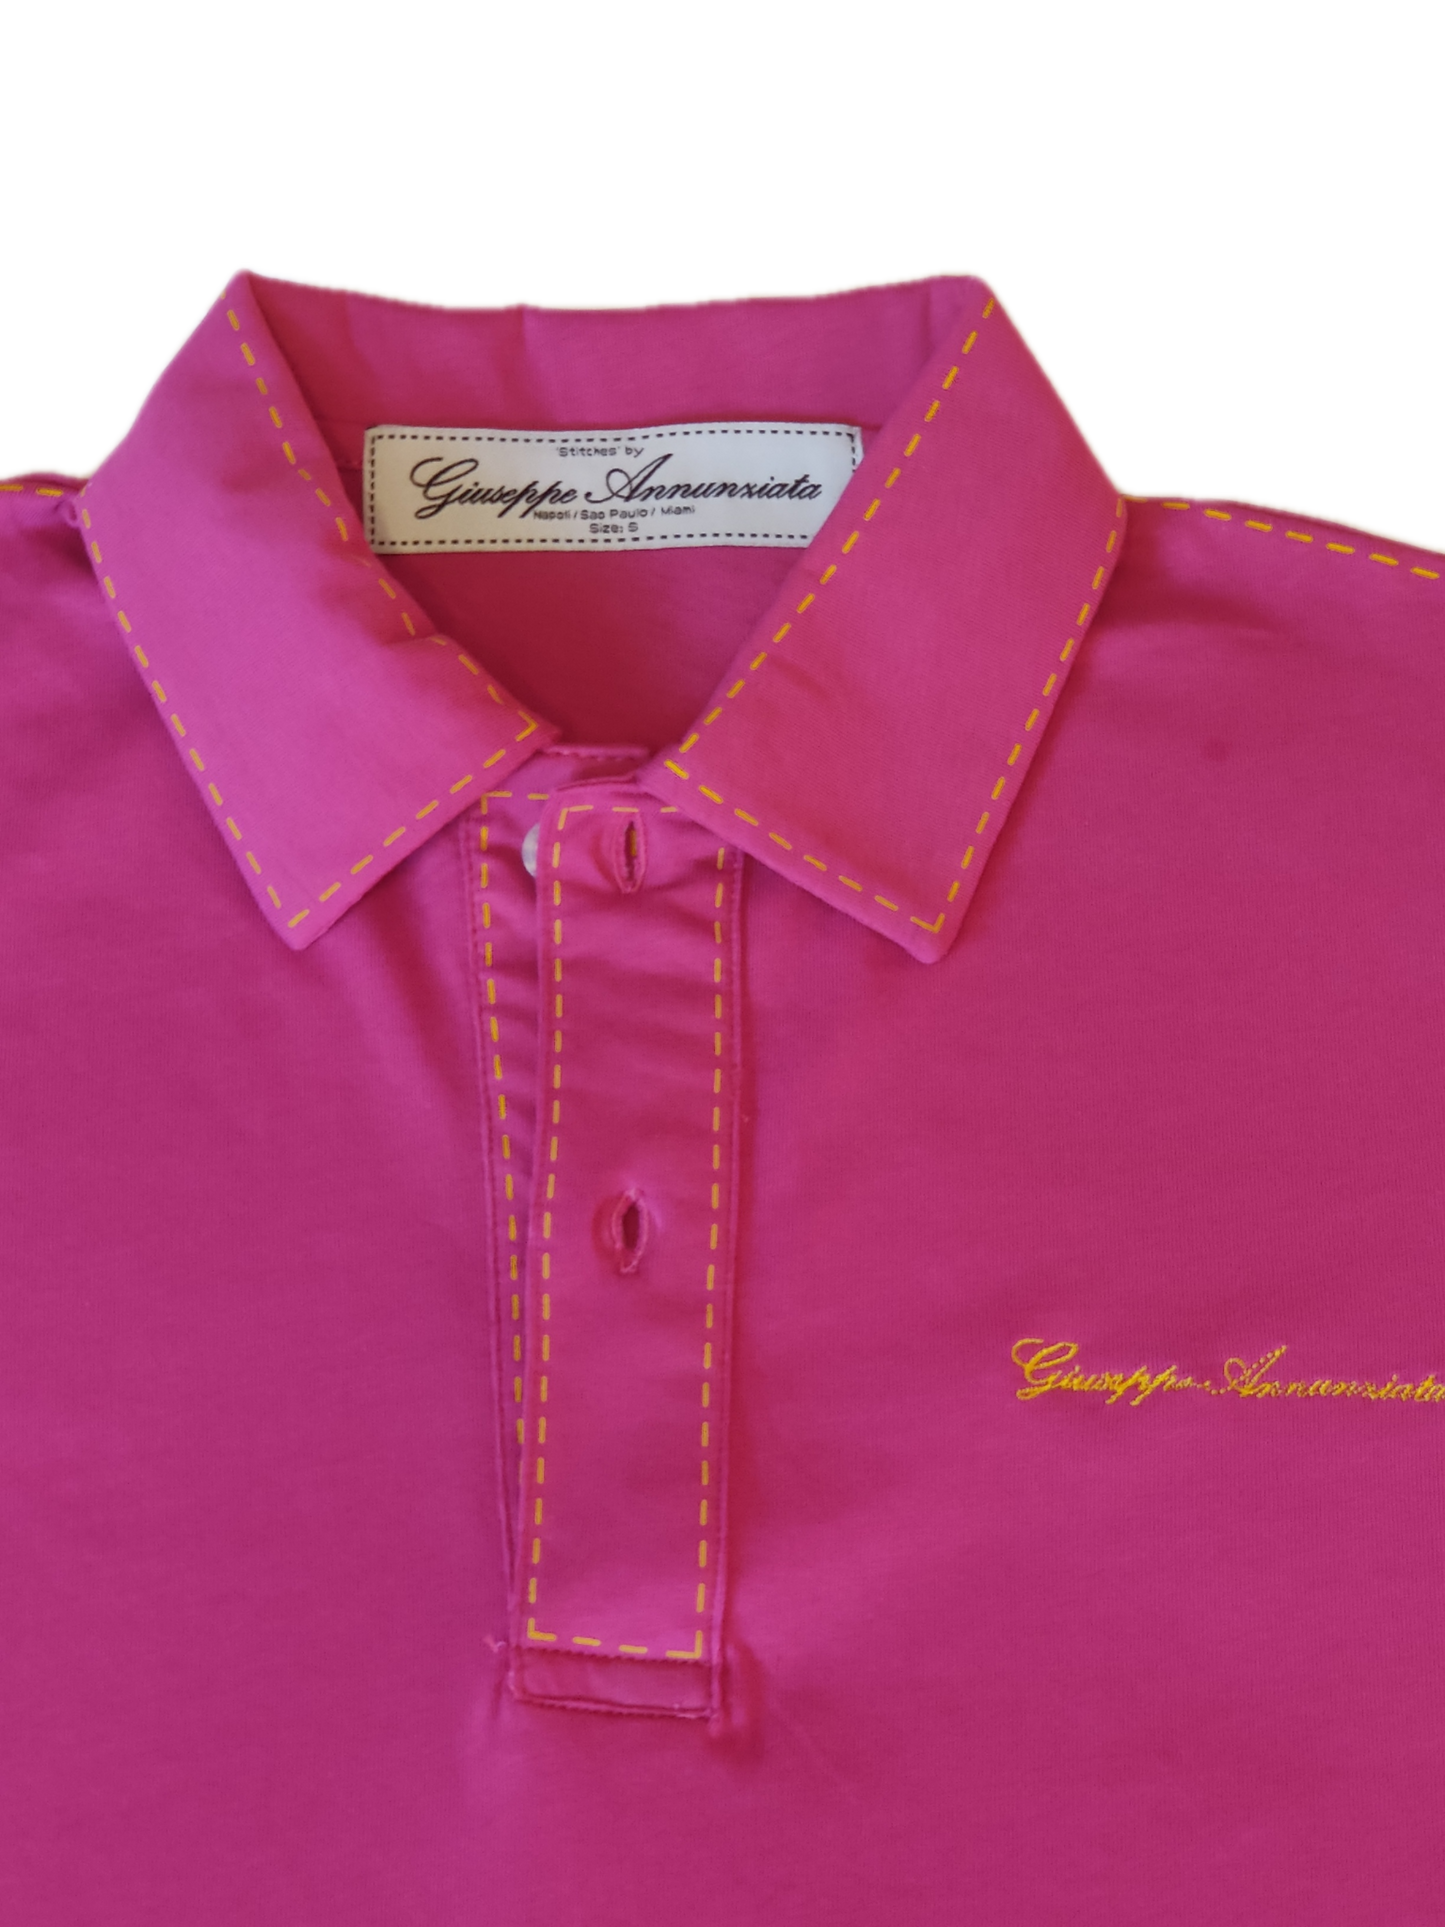 Stitches Polo Pale Pink and Black